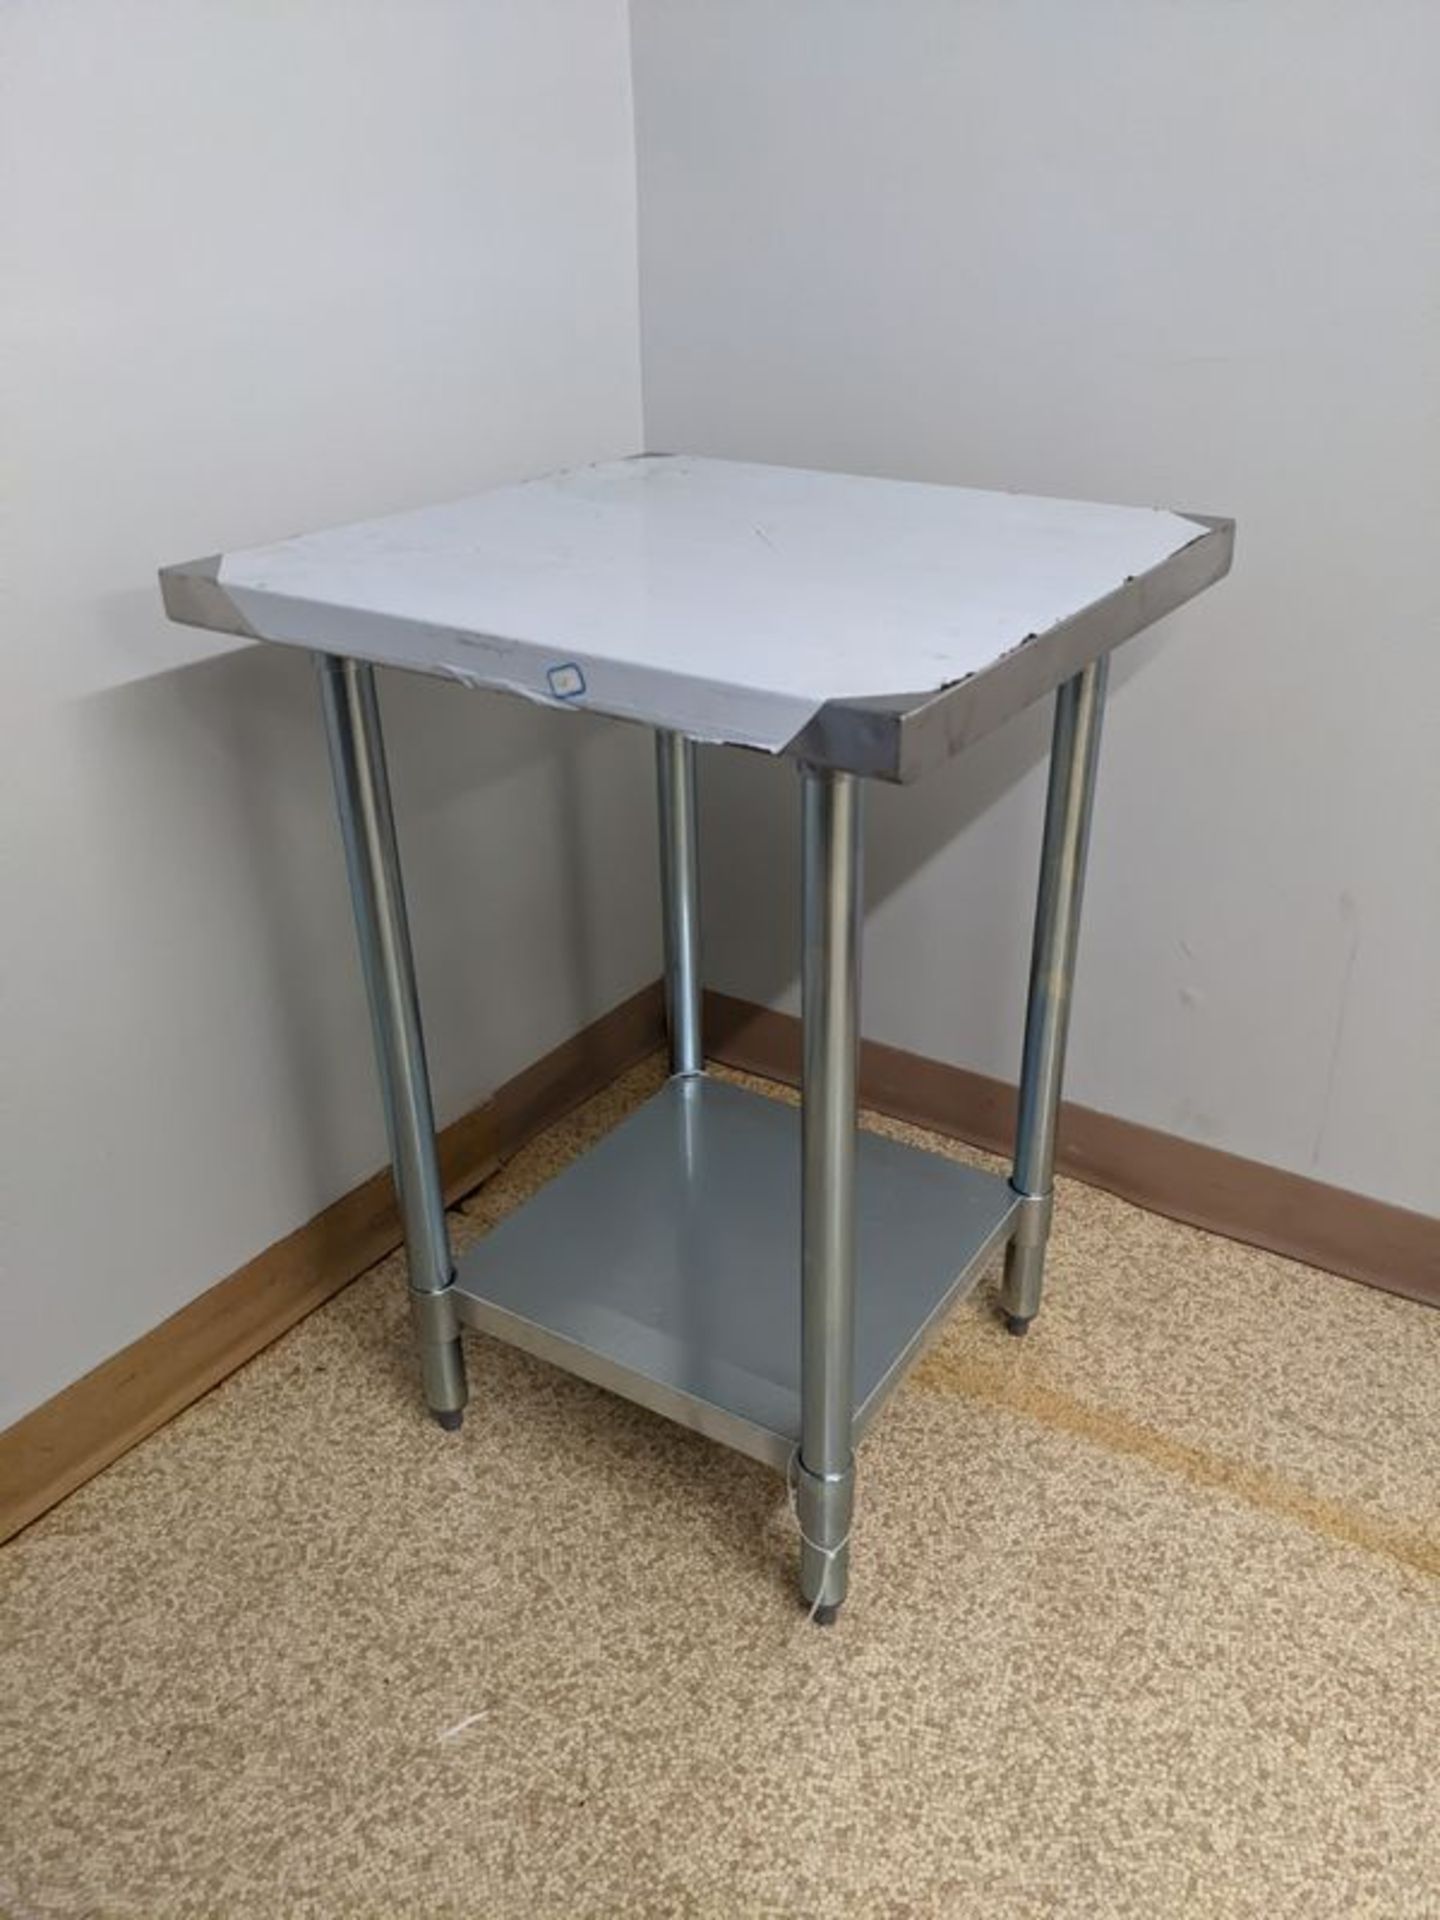 New 24 x 24" Two Tier Stainless Steel Table